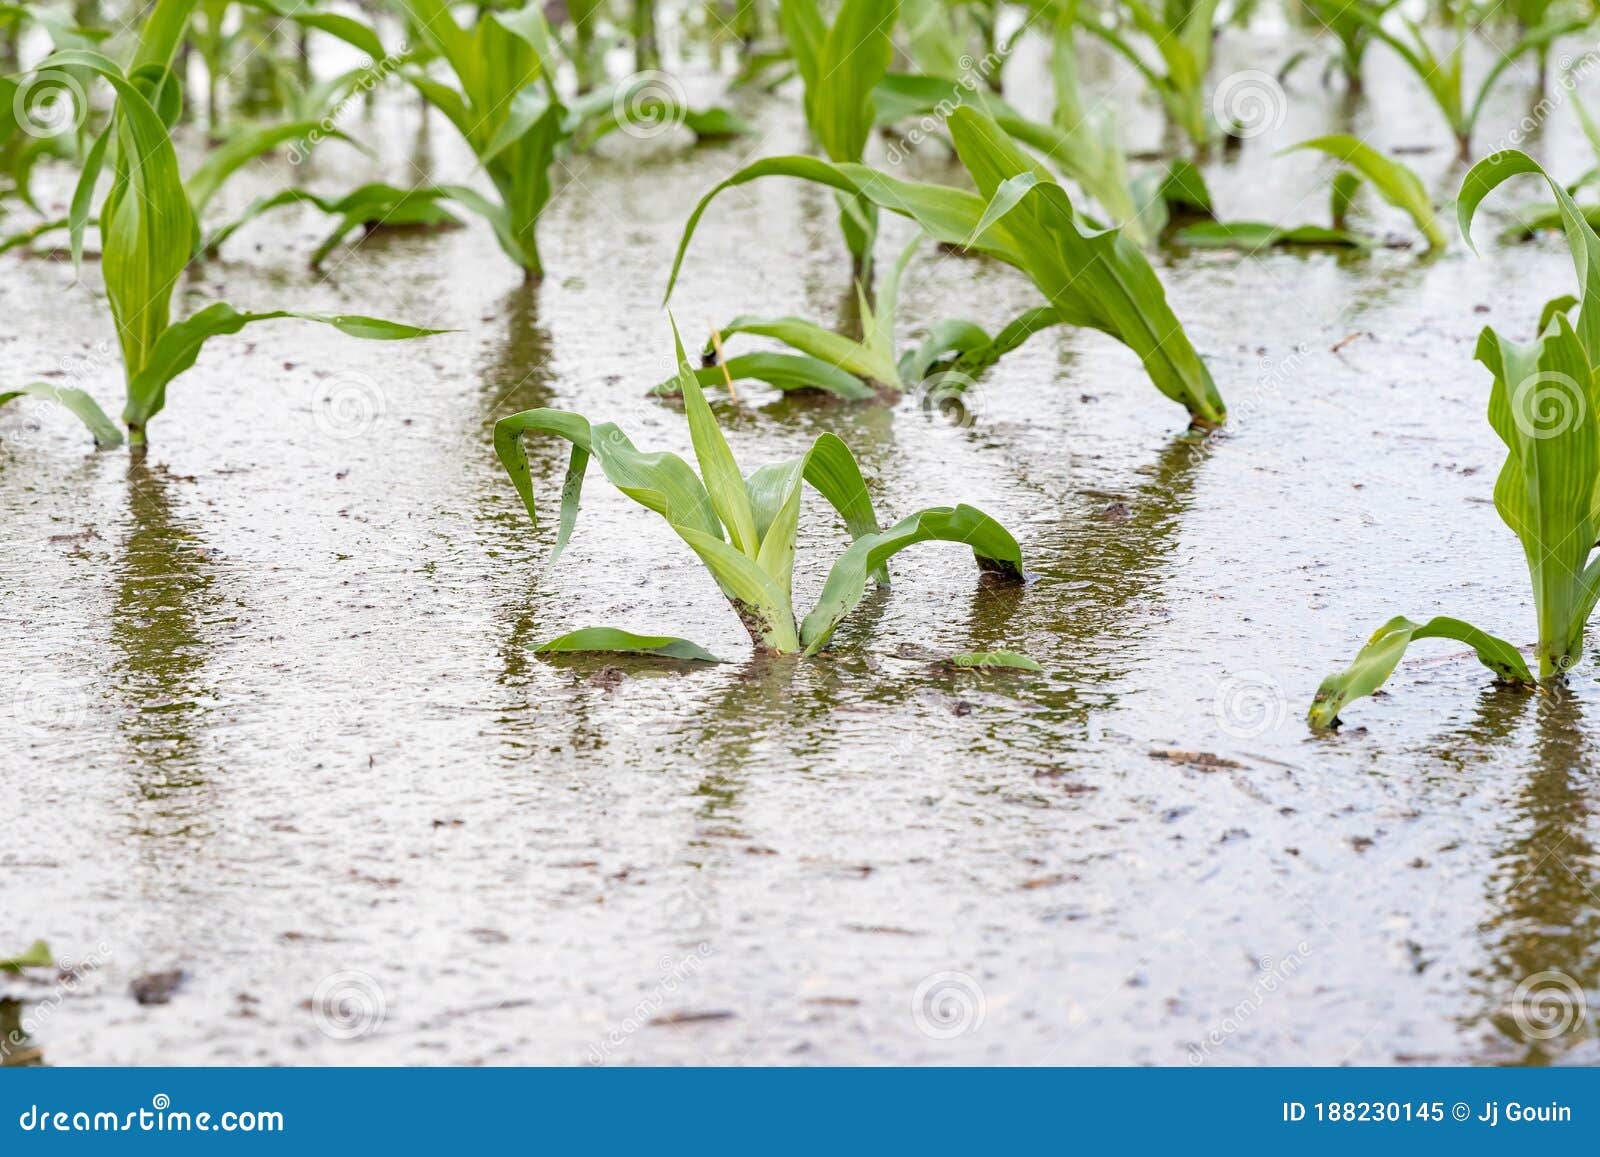 cornfield flooding due to heavy rain and storms in the midwest